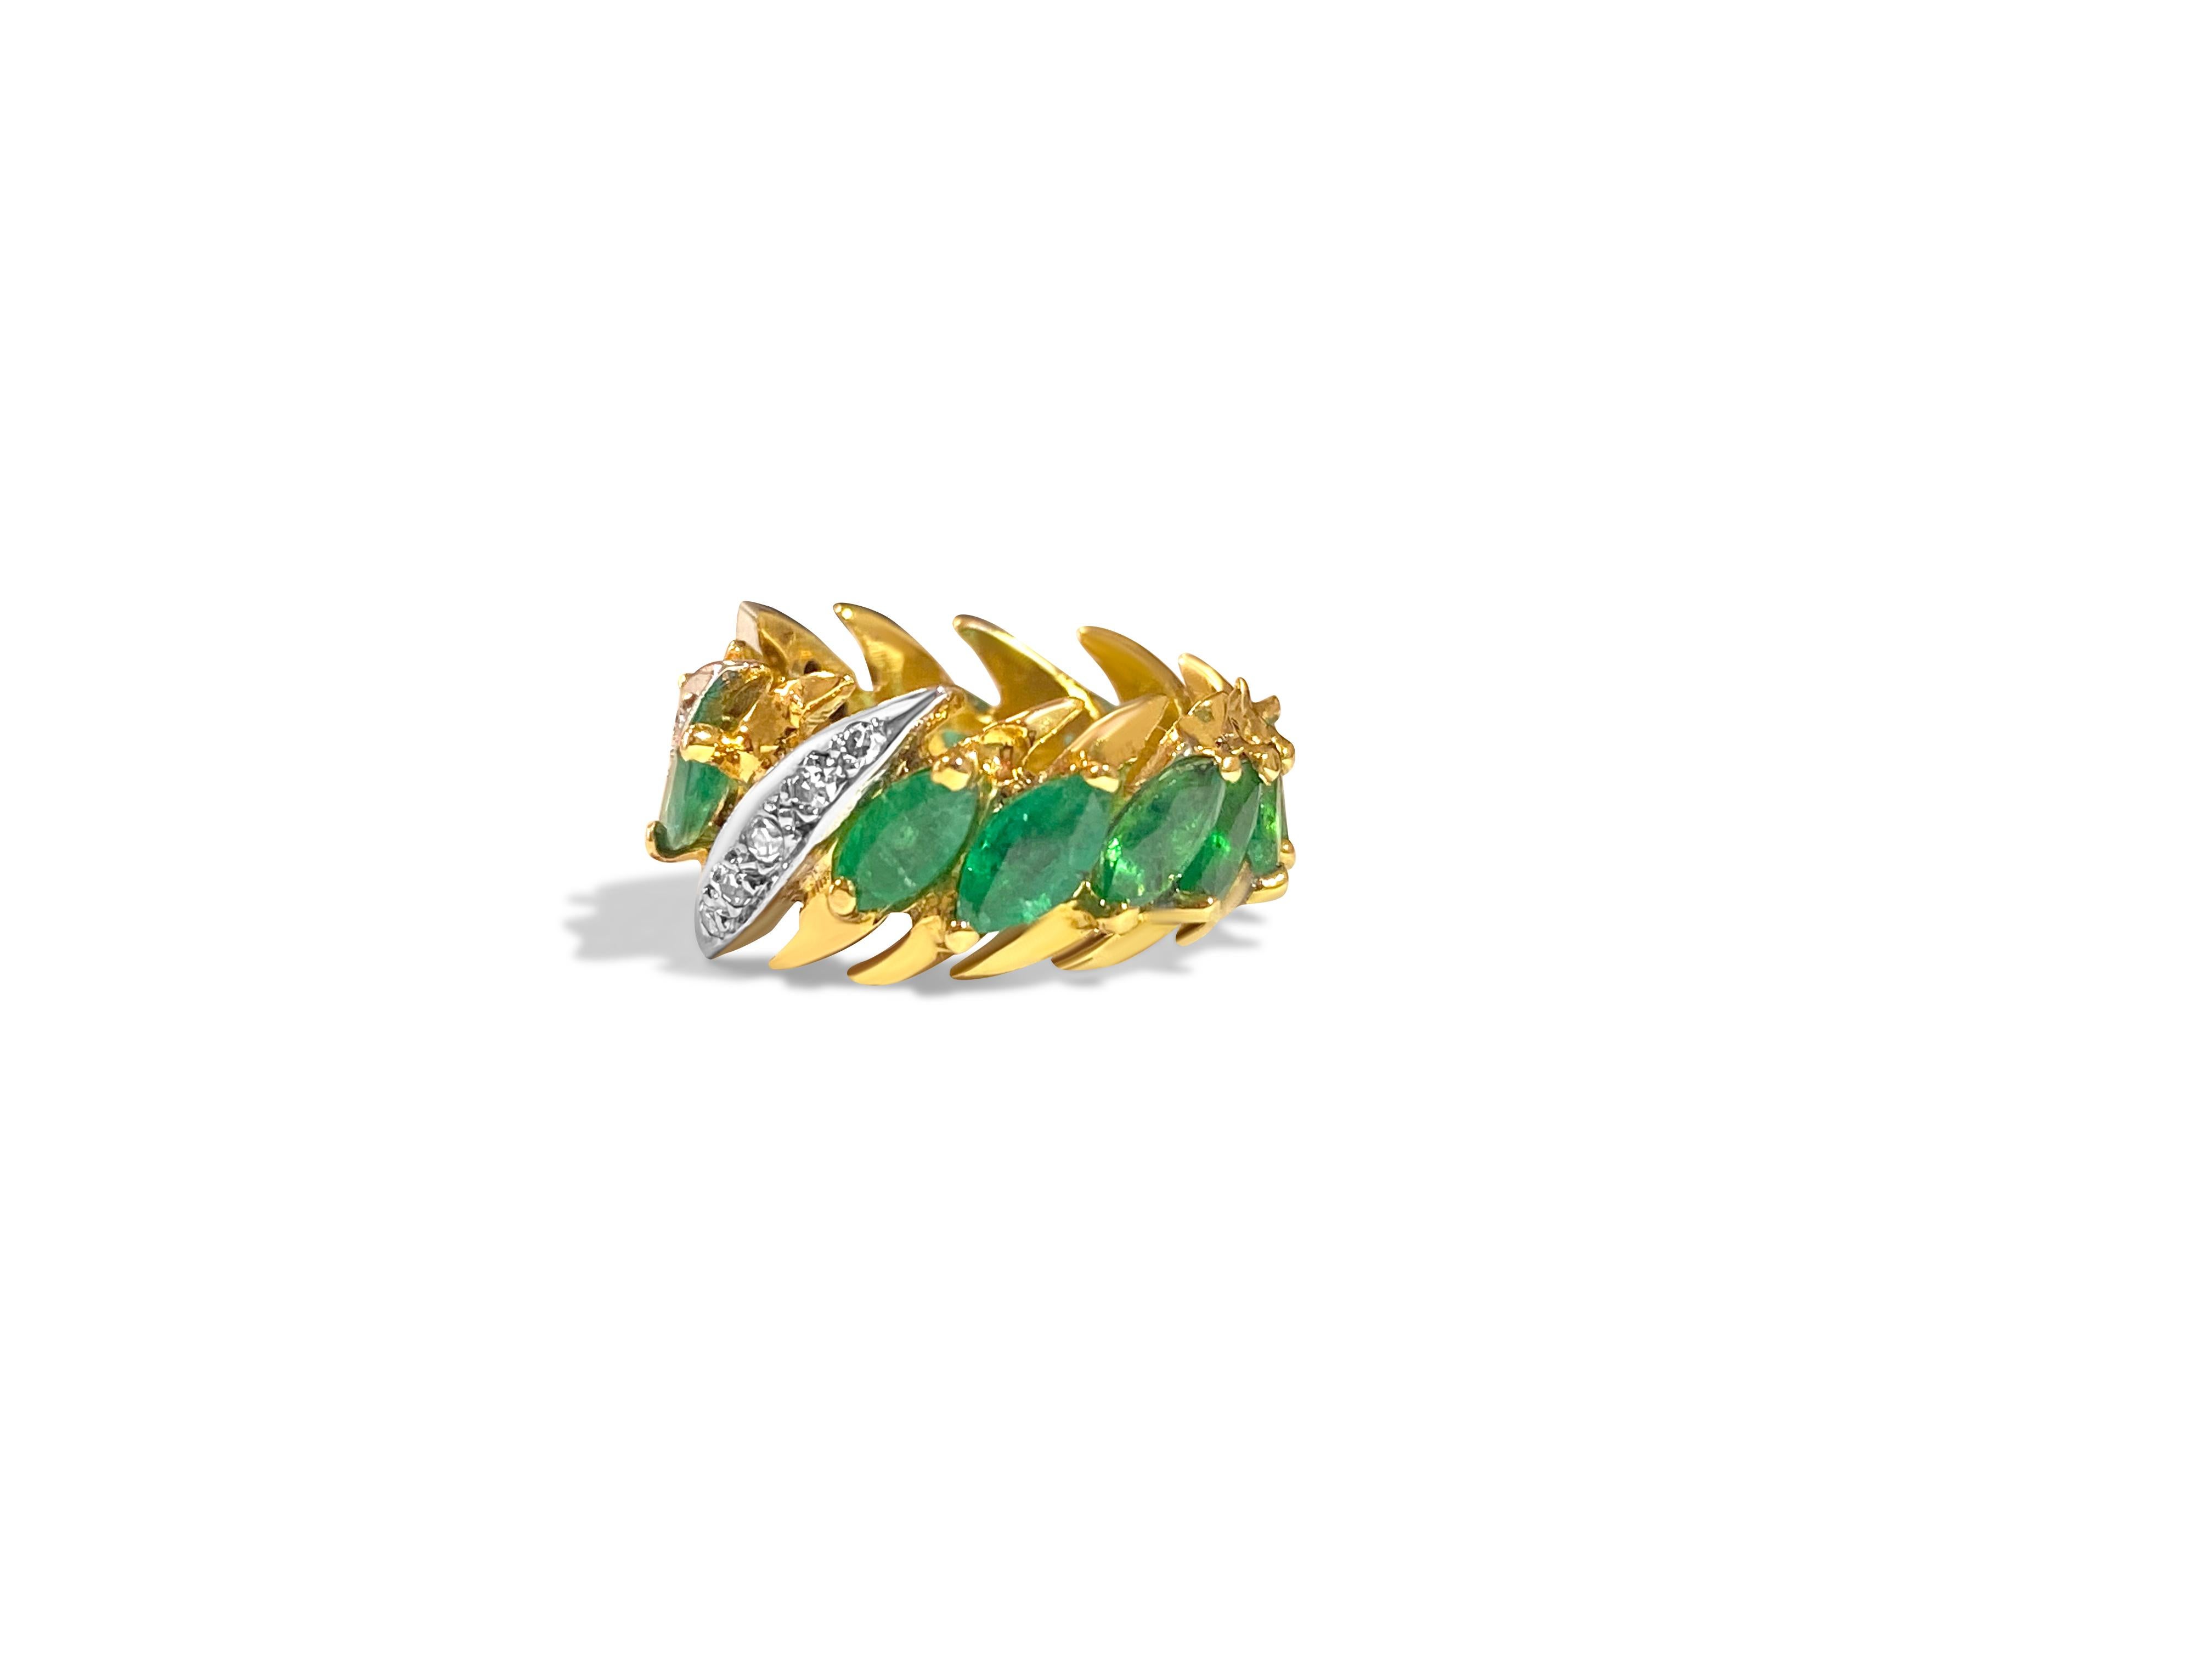 Modern 3.05 Carat Diamond & Emerald Ring 14K Gold In Excellent Condition For Sale In Miami, FL